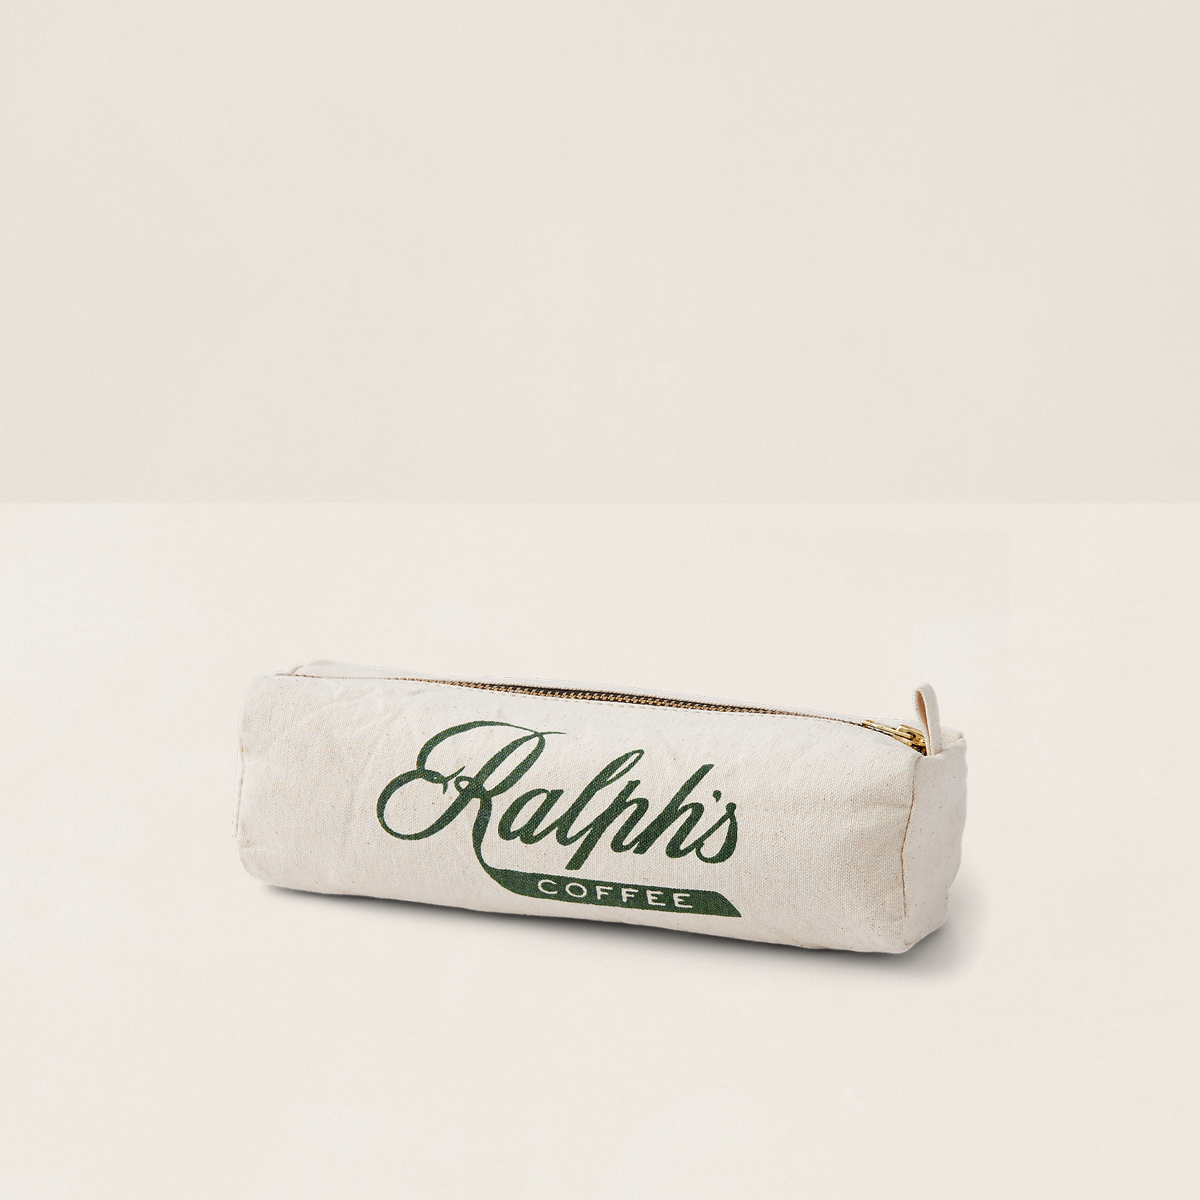 Ralph's Coffee Pencil Pouch